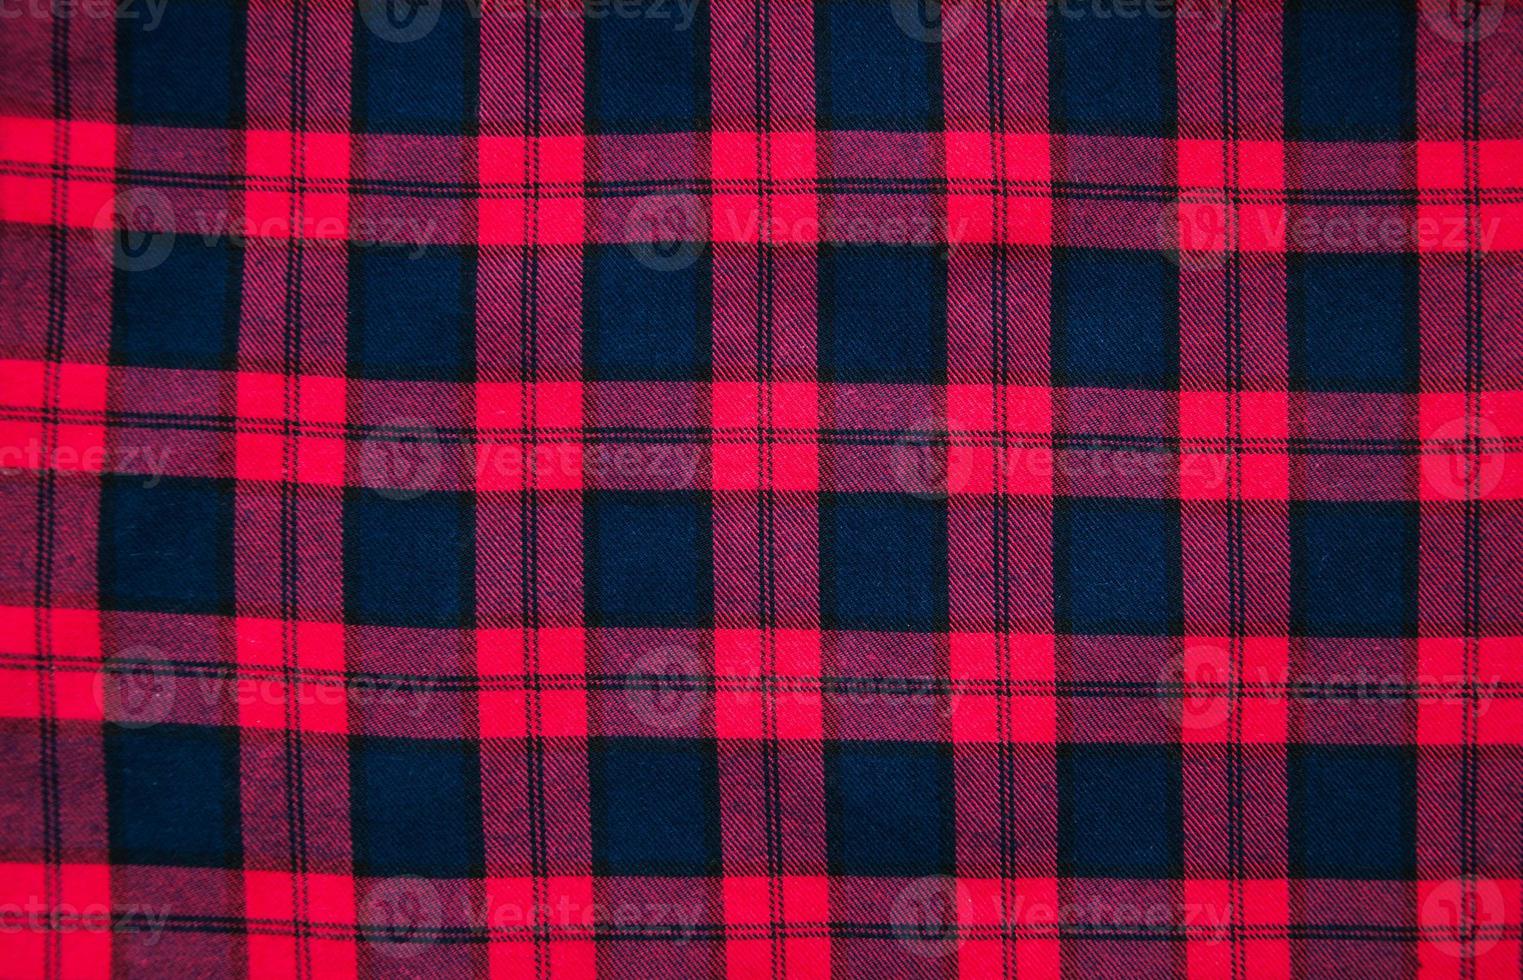 texture of red black checkered fabric photo